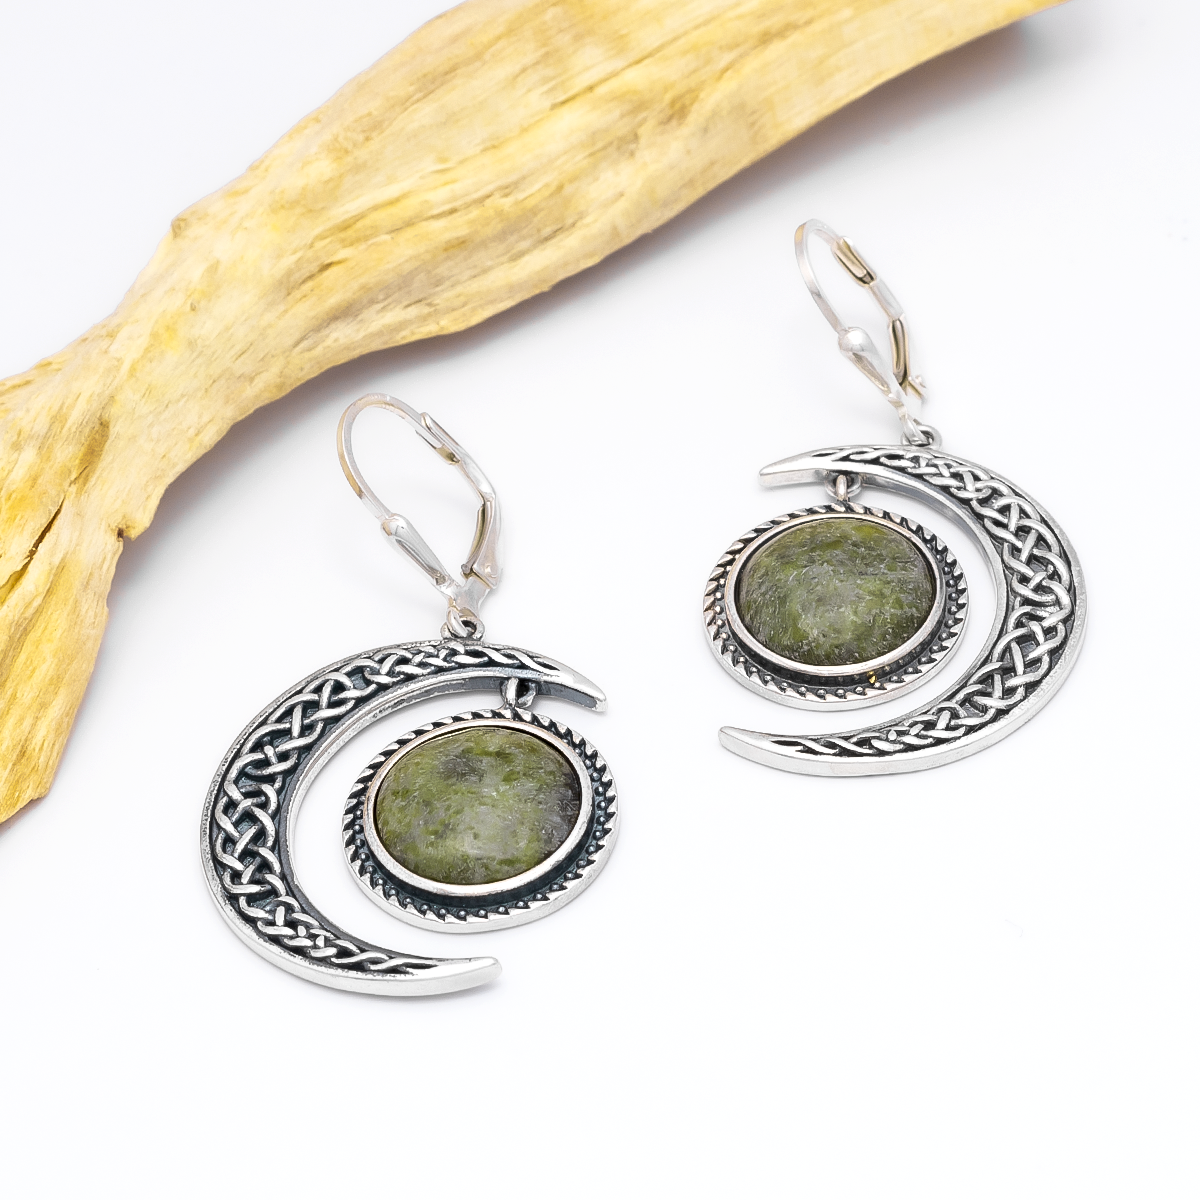 Connemara Marble Celtic Sun and Moon Earrings in Sterling Silver